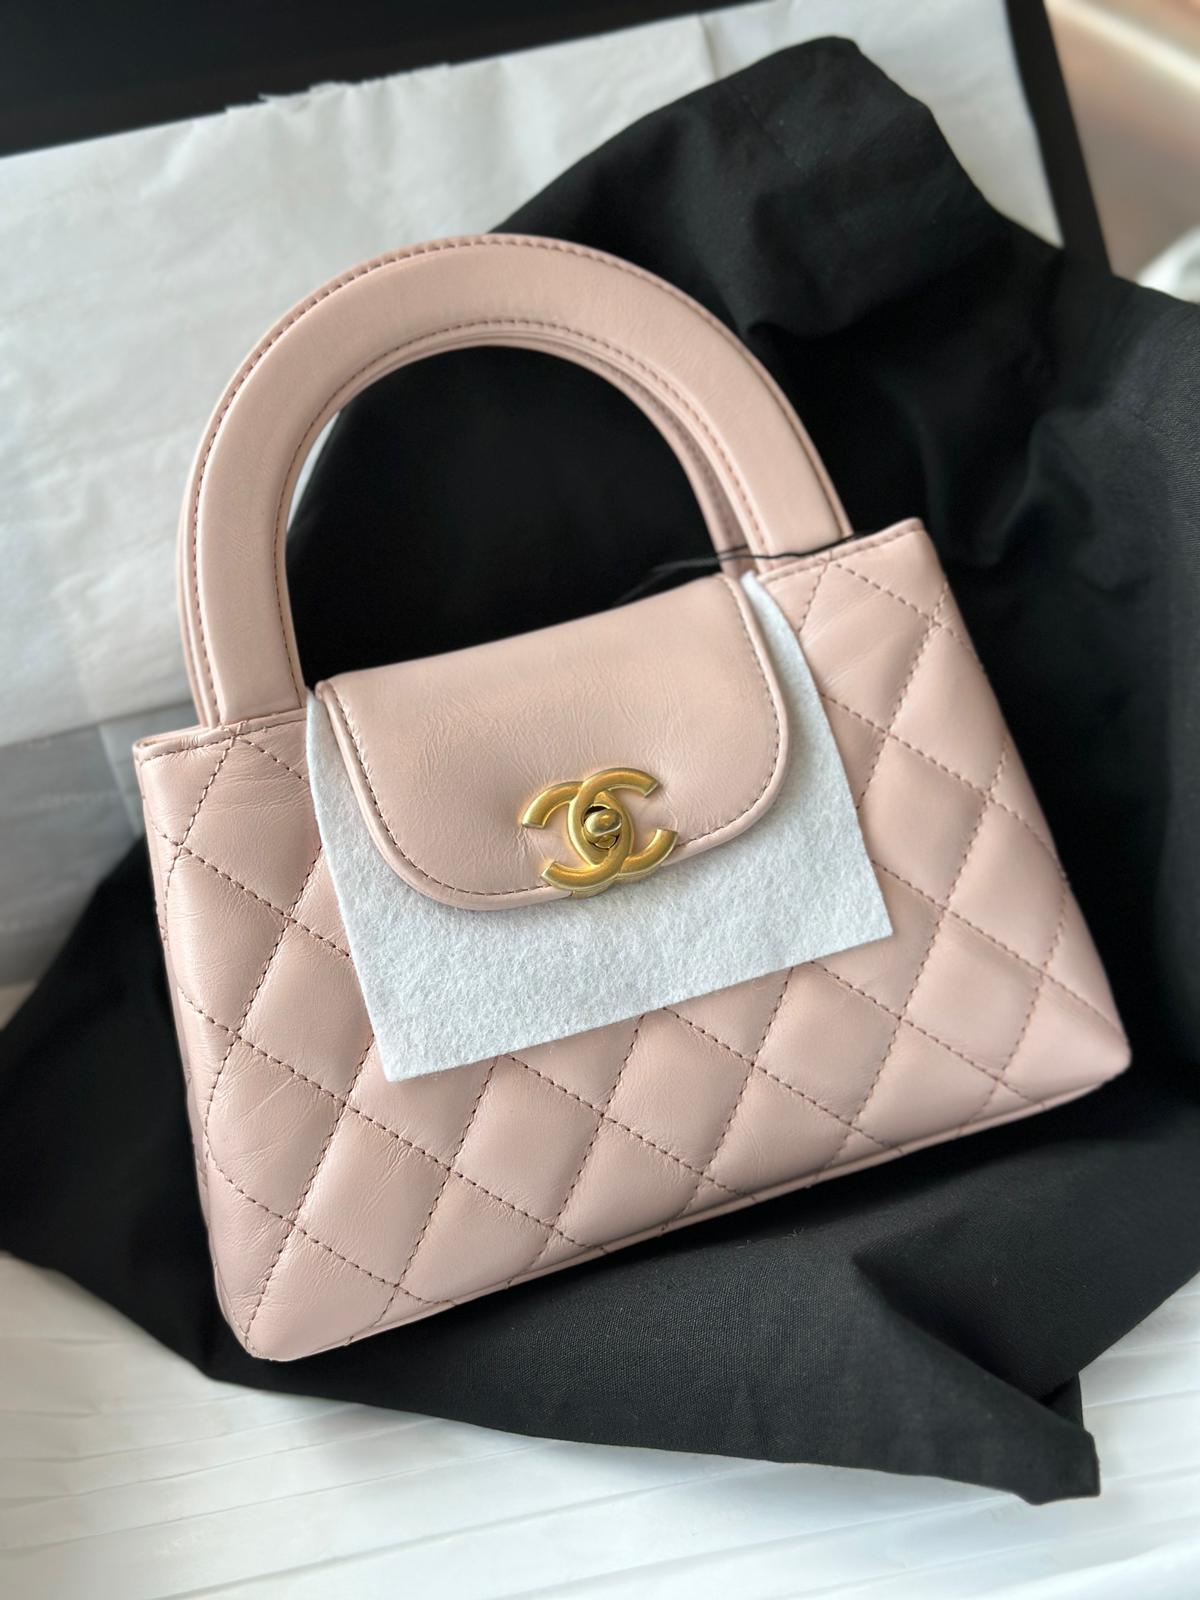 HOW TO BUY YOUR FIRST CHANEL BAG IN 2023 FOR EVERY BUDGET? 